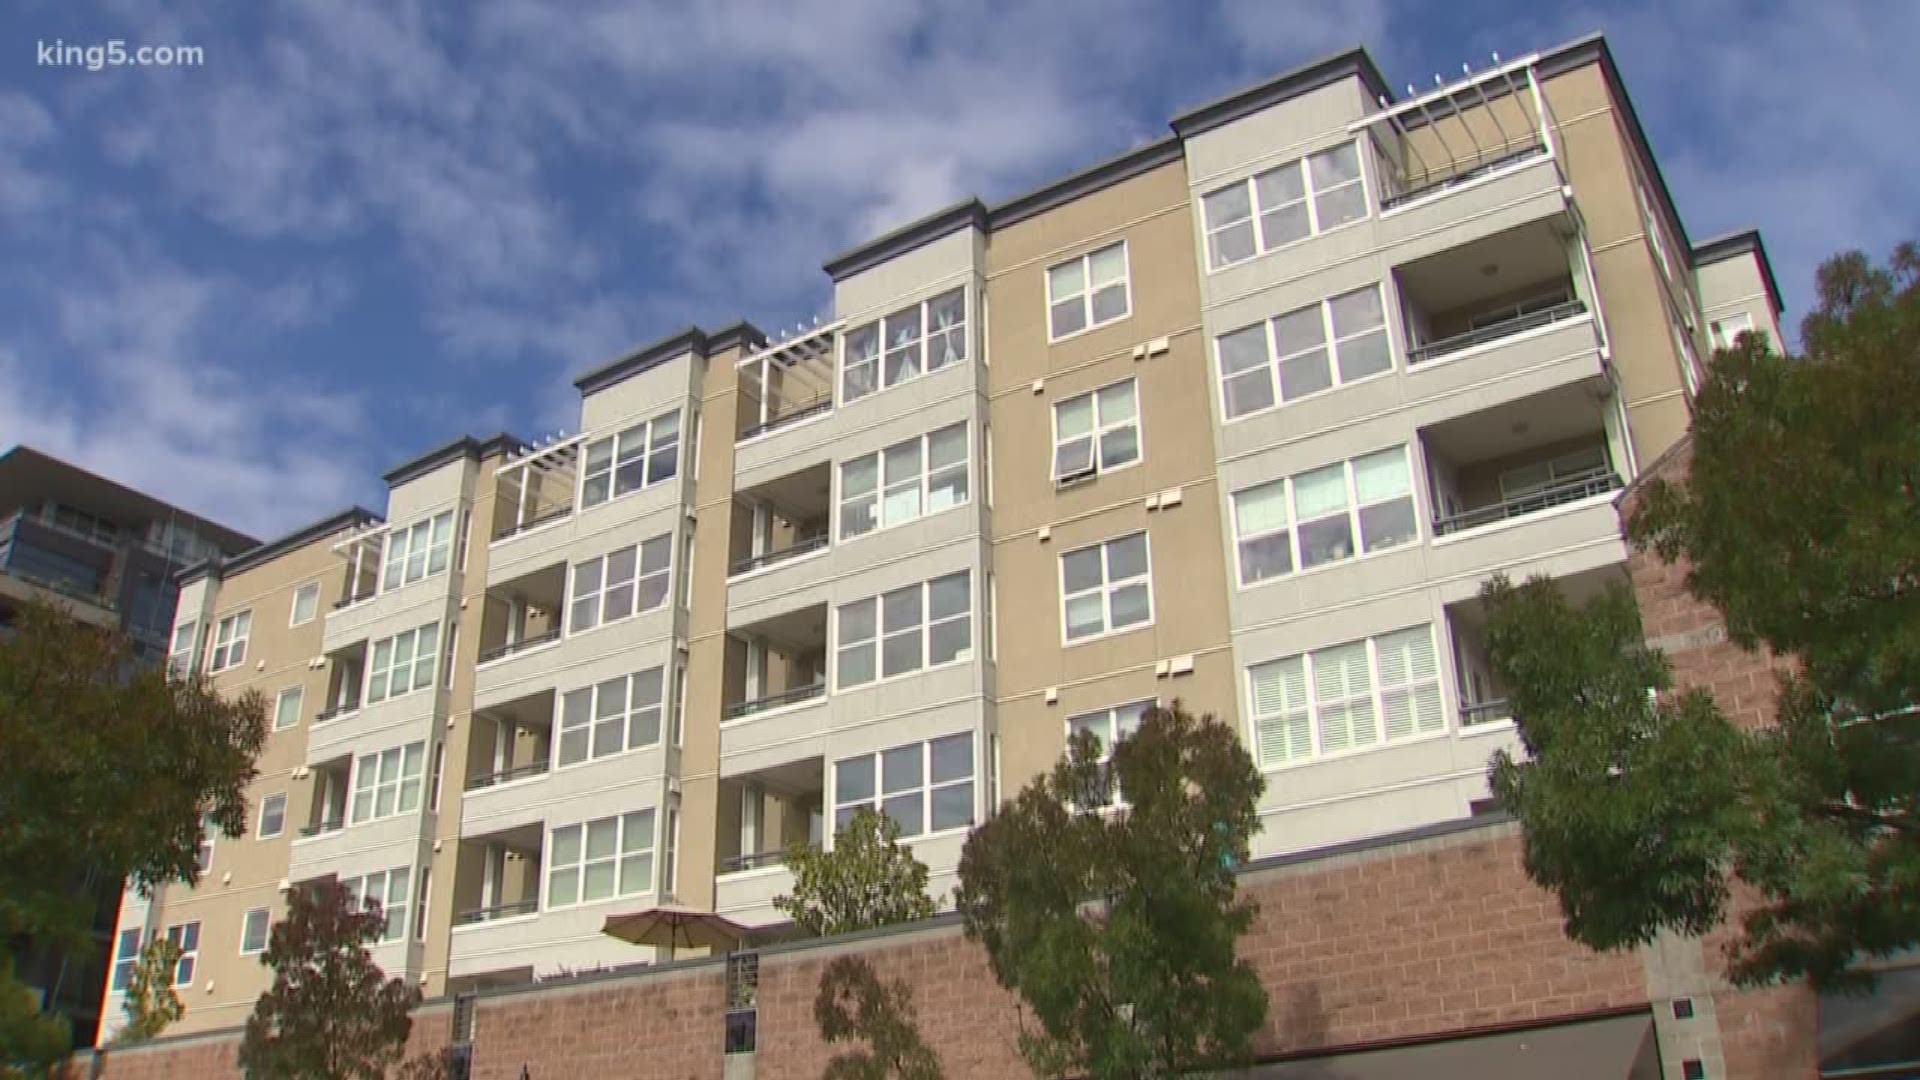 An Olympia couple, both high level employees in state government, have listed their Bellevue condo for sale. They have been forced to put it on the market after ARCH affordable housing determined the couple violated program rules. Arch has been looking into this since Chris Ingalls first reported in November on problems in the largest affordable housing program in east King County. Chris has the latest.